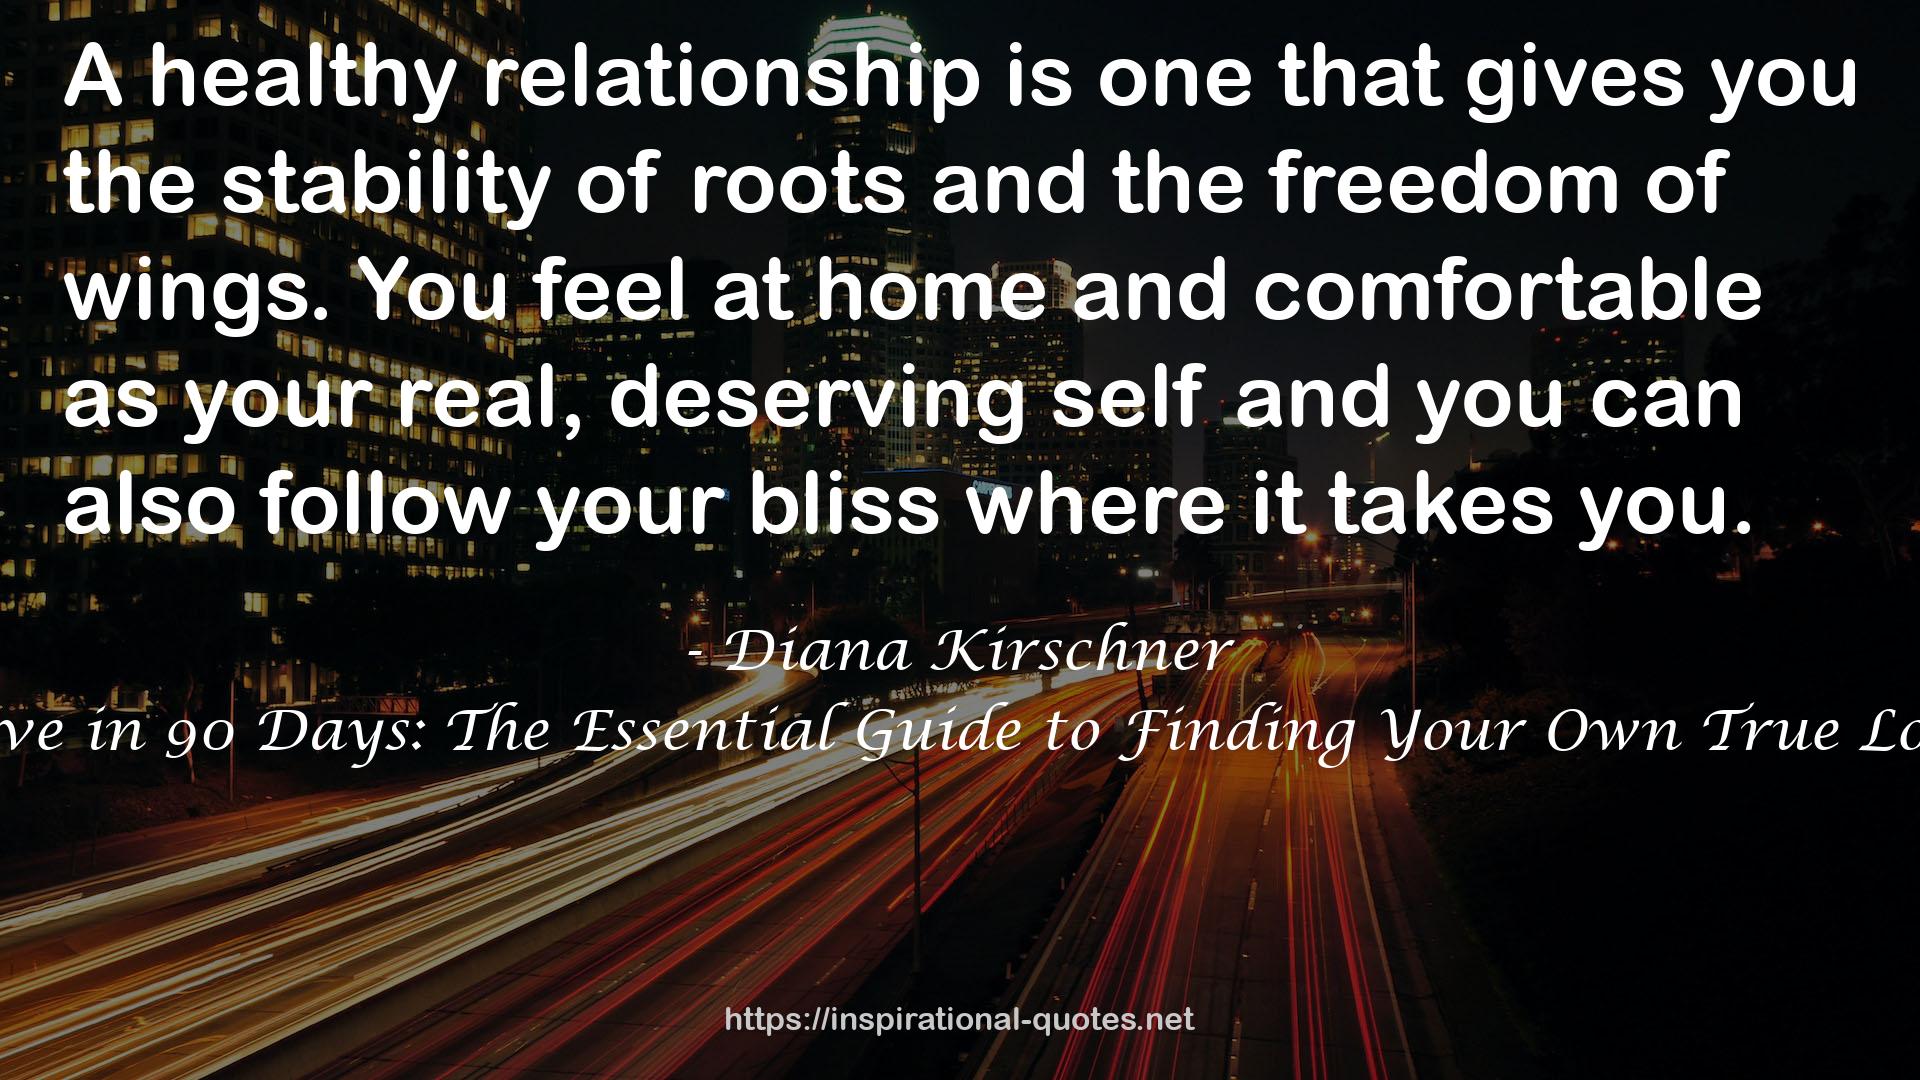 Diana Kirschner QUOTES